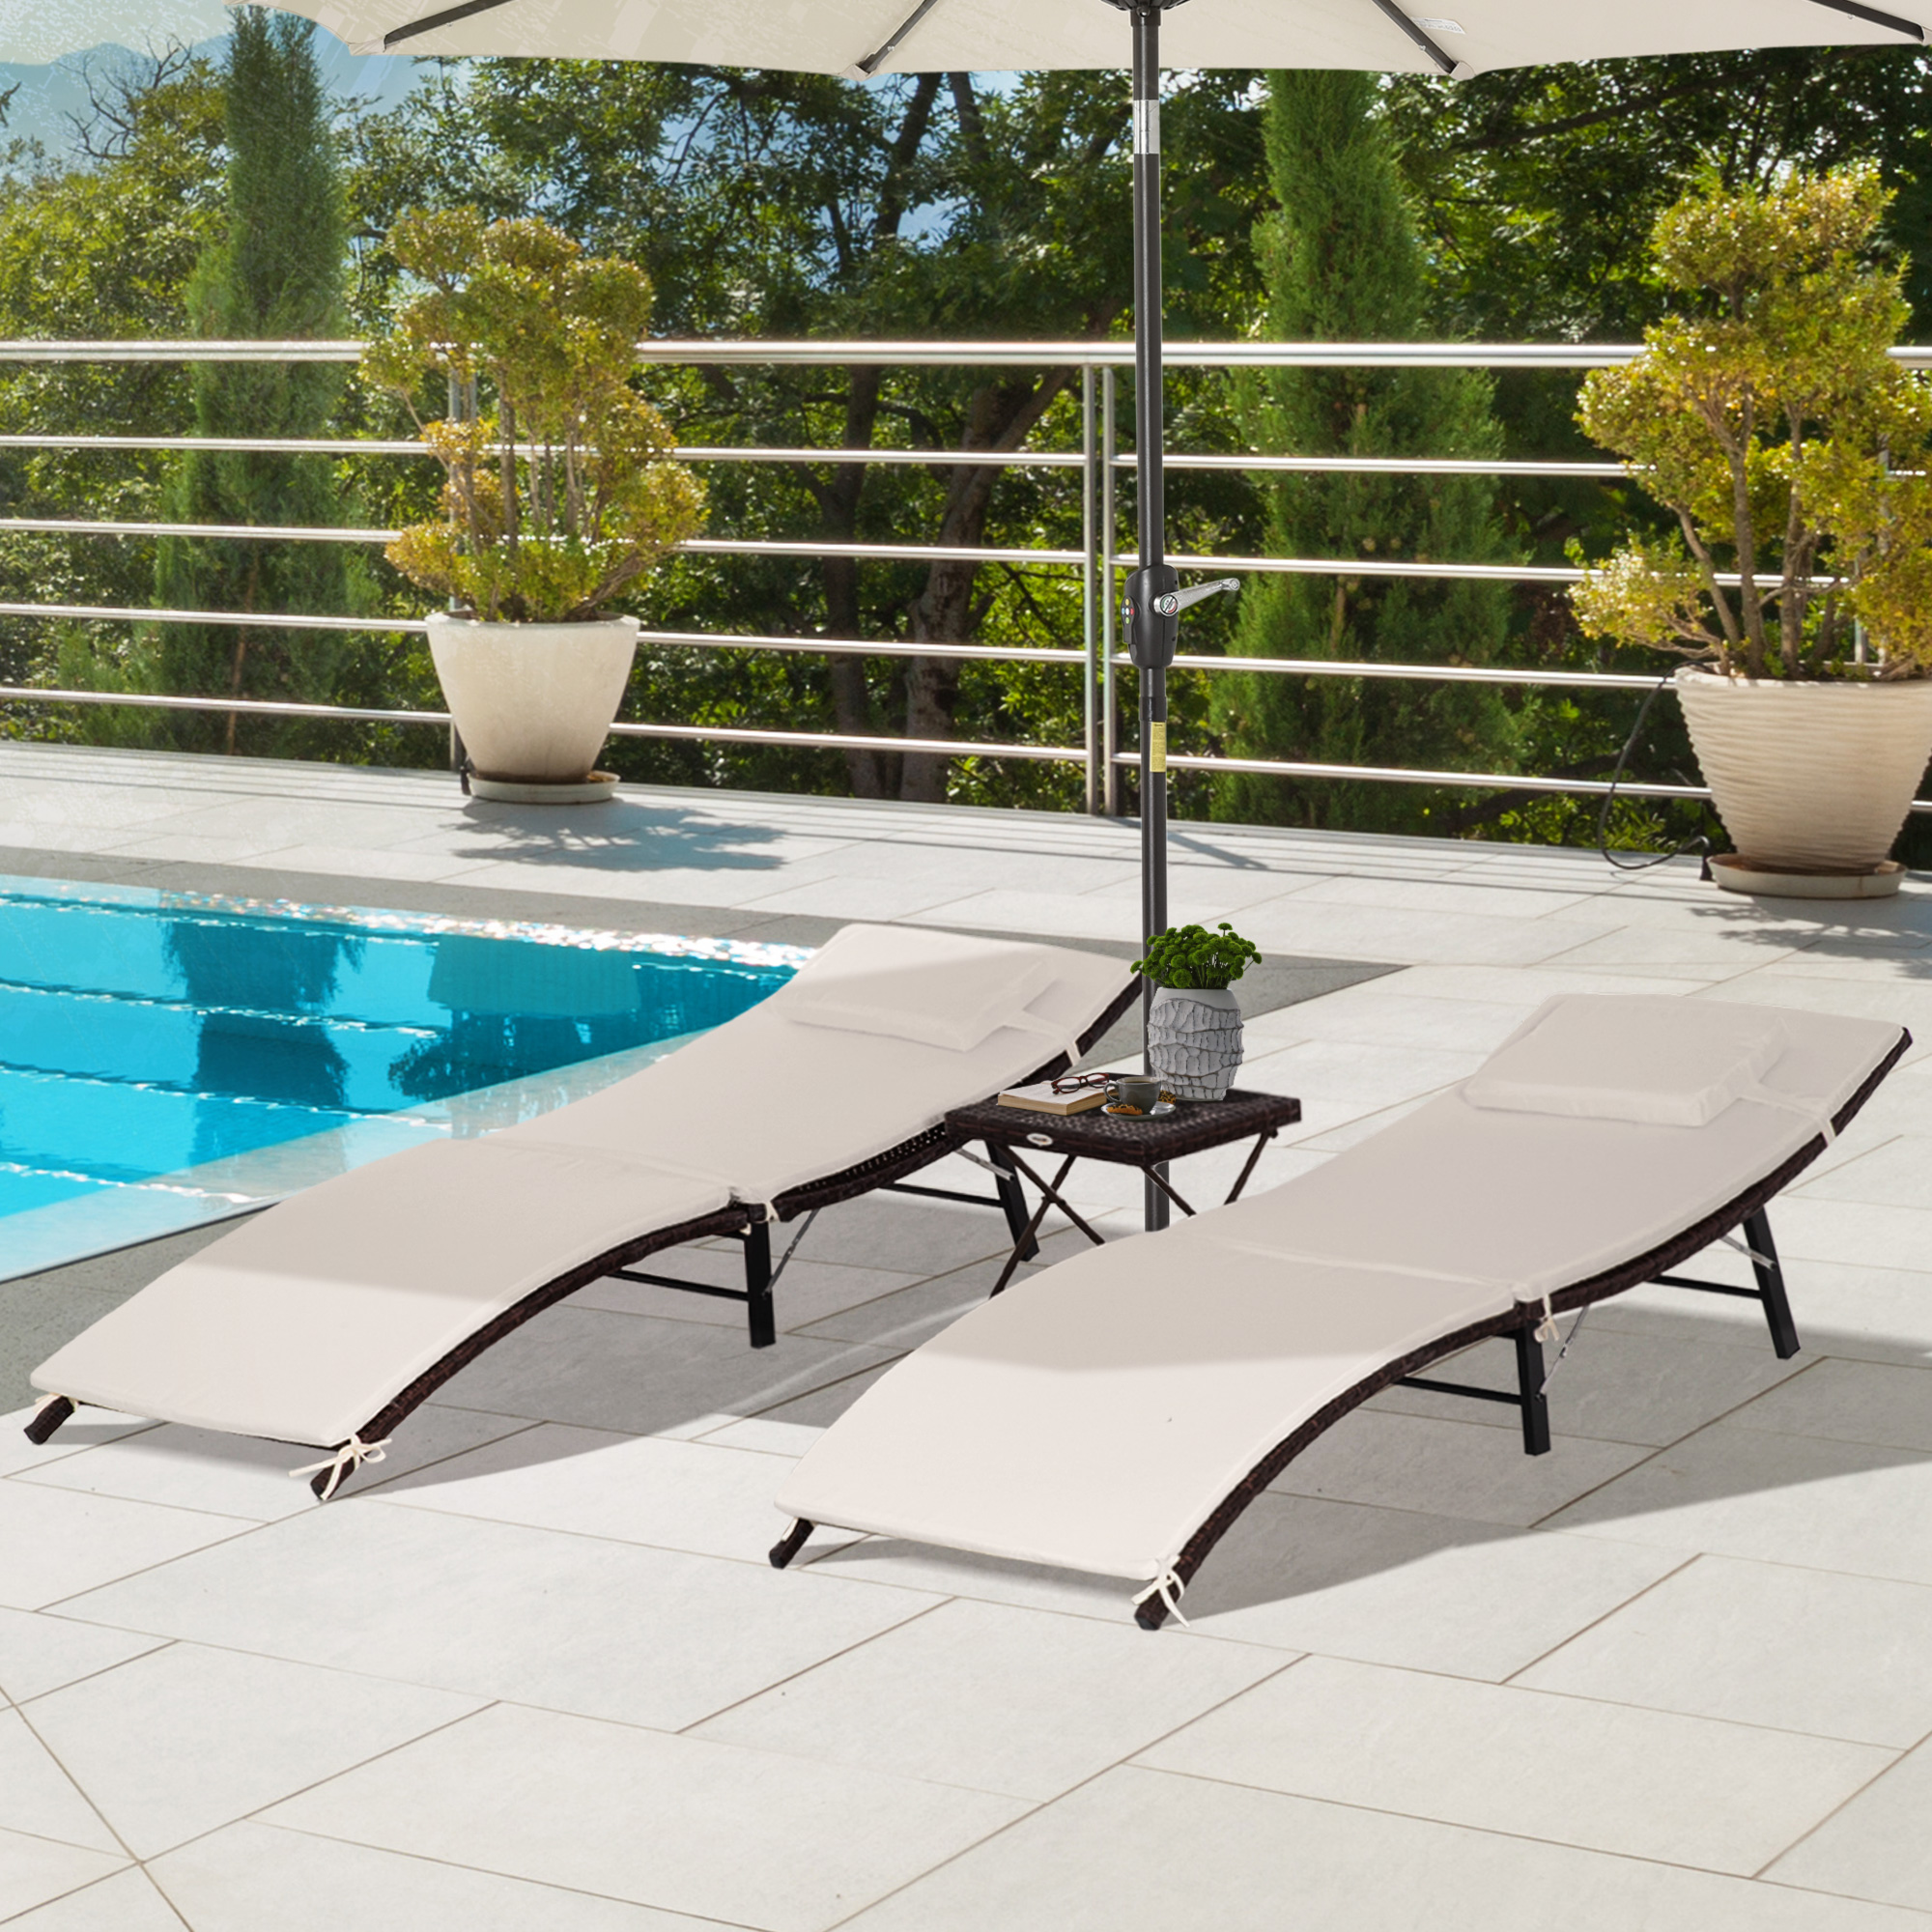 Outsunny Folding Chaise Lounge Pool Chair Set with Table, Beige - image 2 of 9